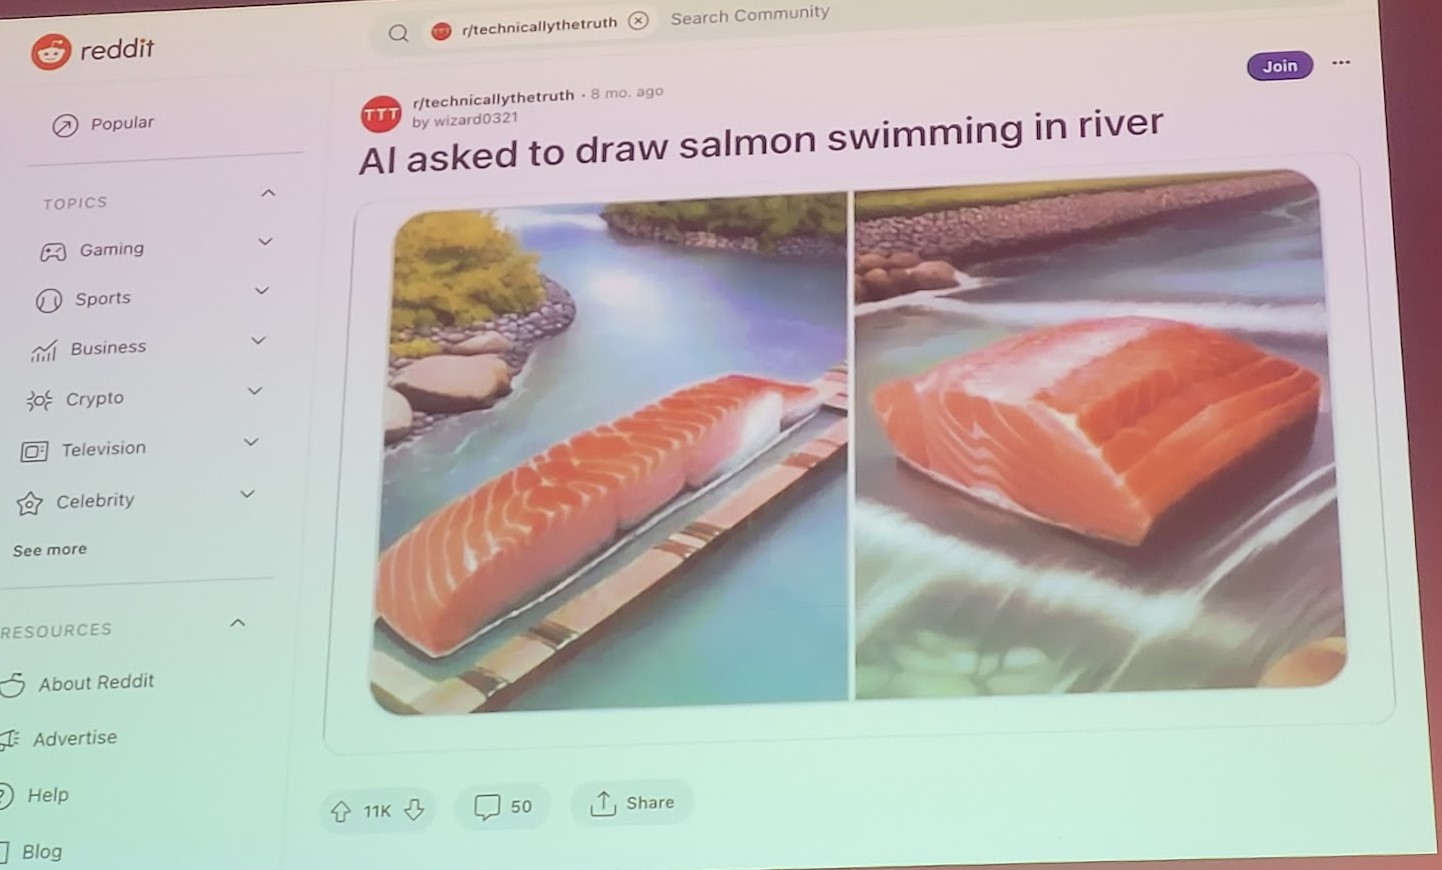 Post from reddit, which says "AI asked to draw salmon swimming in river", pictured in post is a river with a piece of salmon steak on it